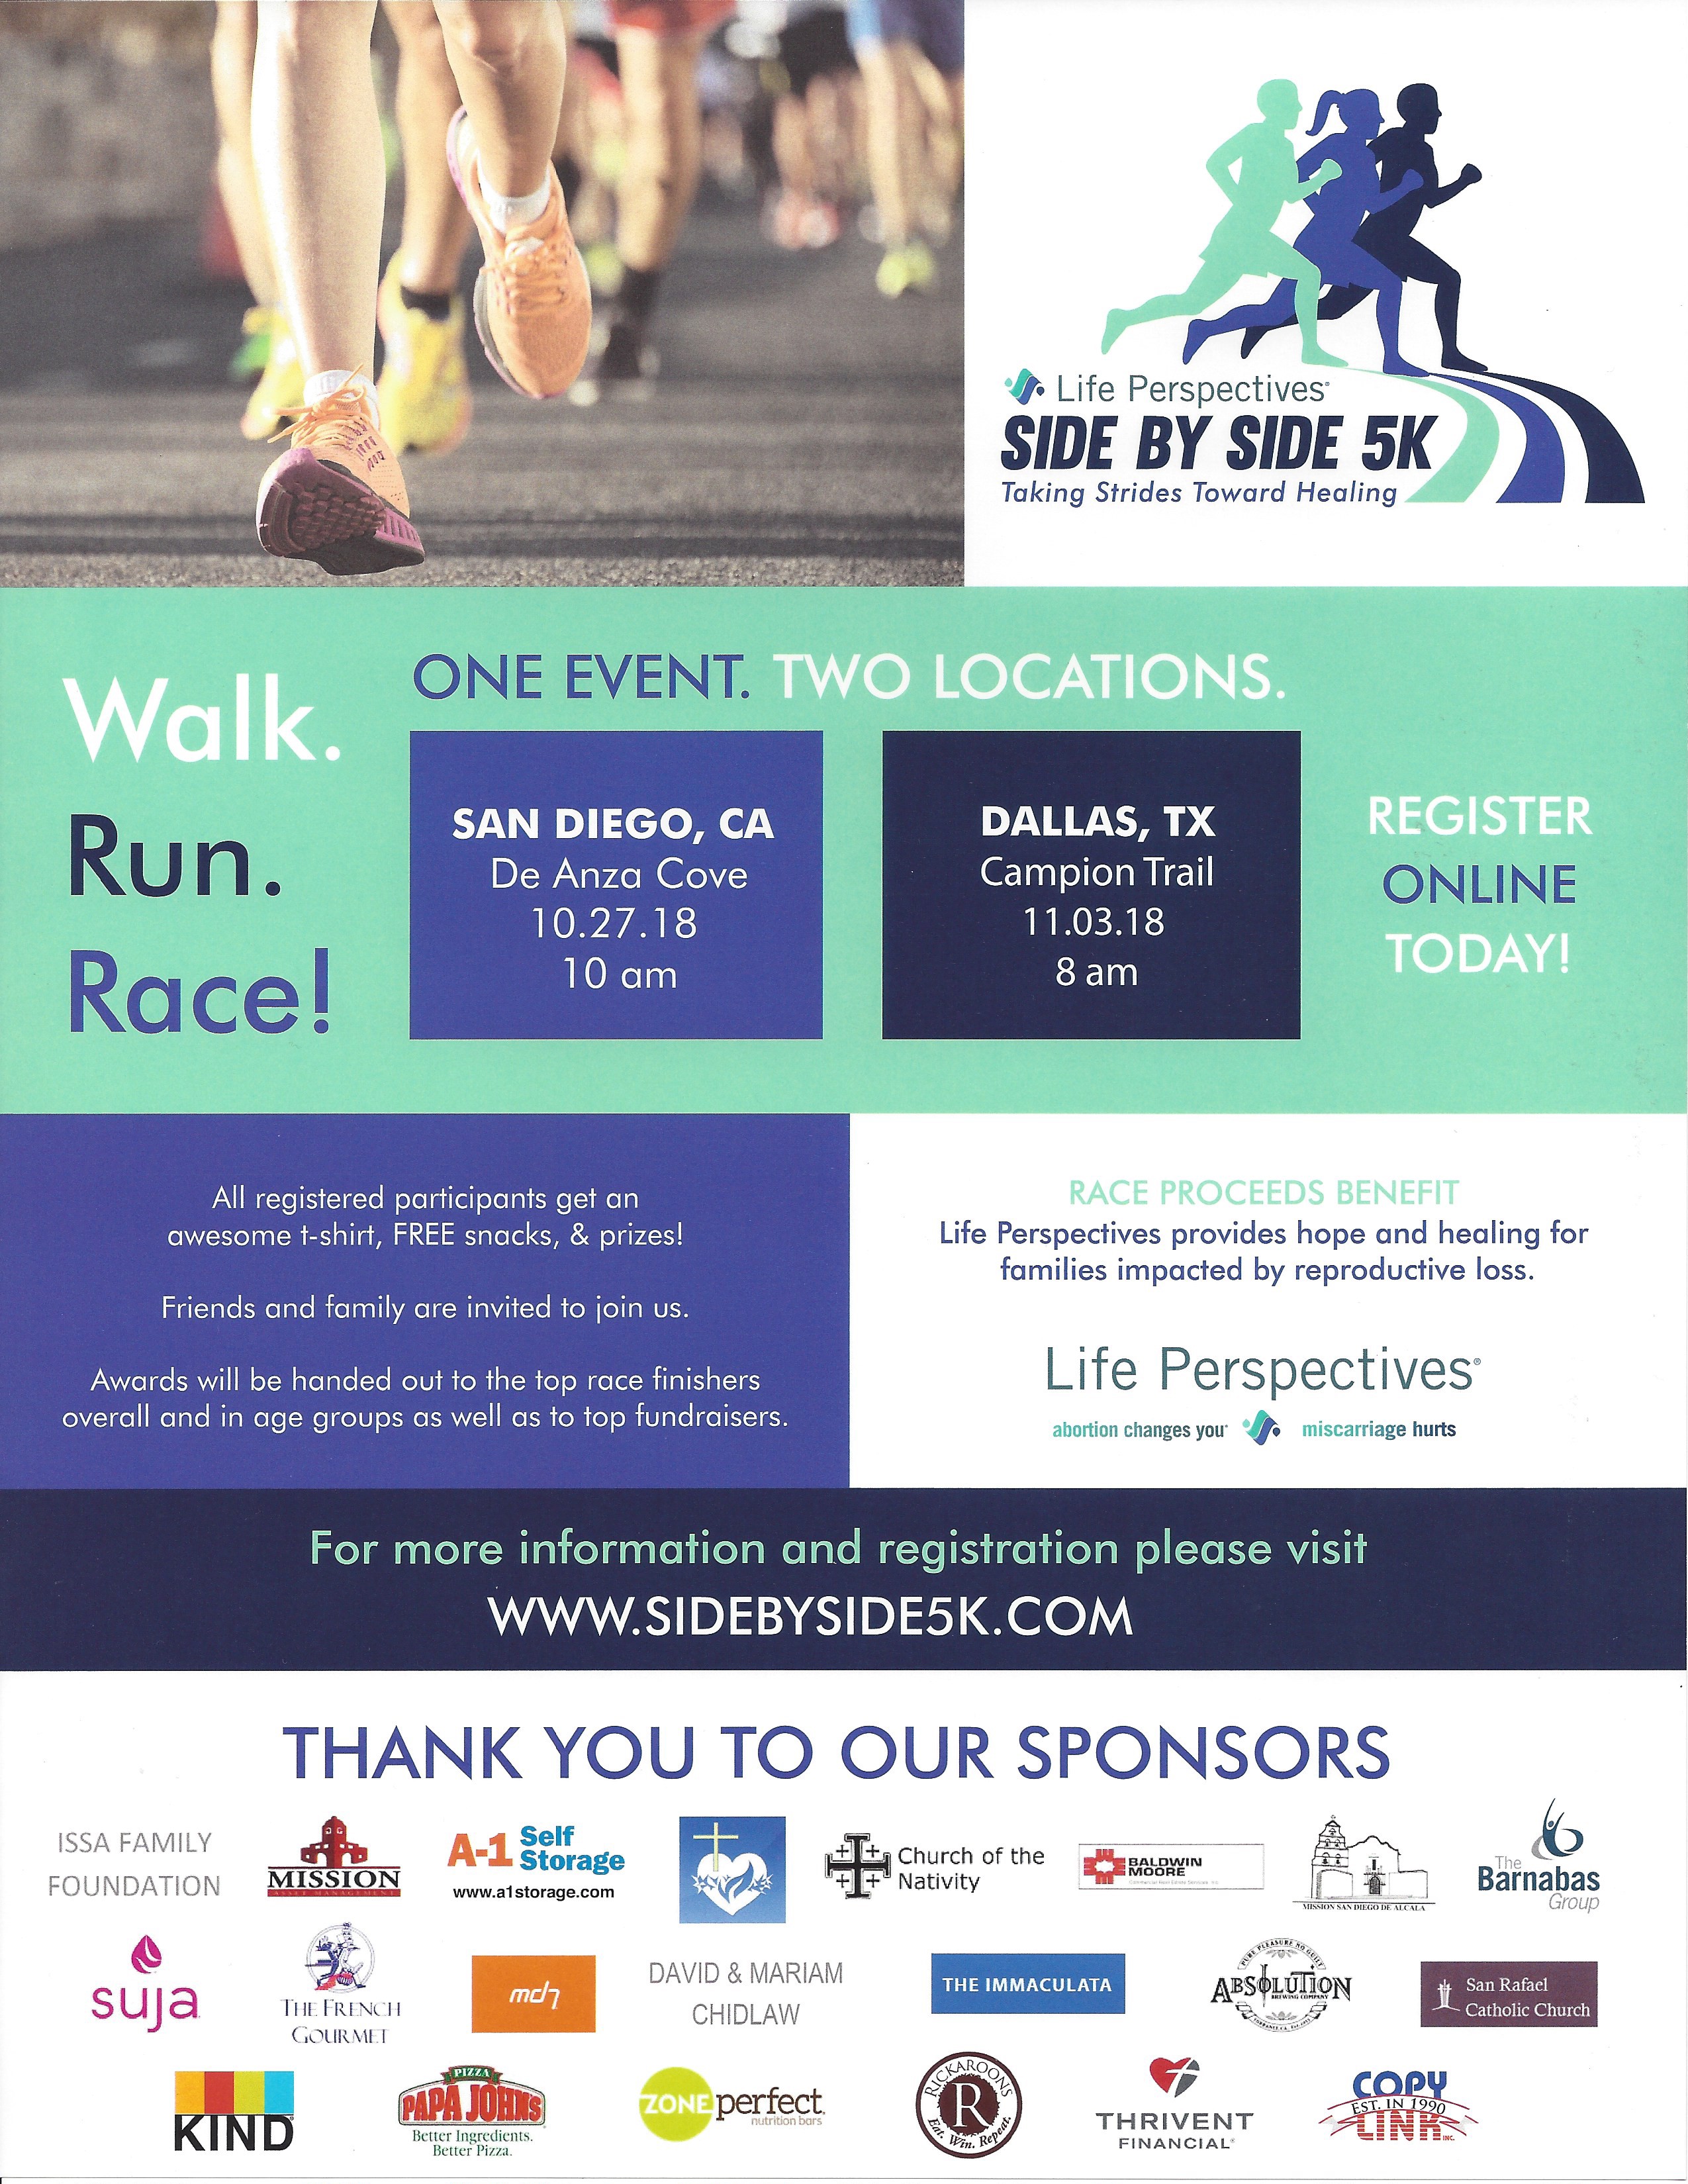 Life Perspectives Side by Side 5K